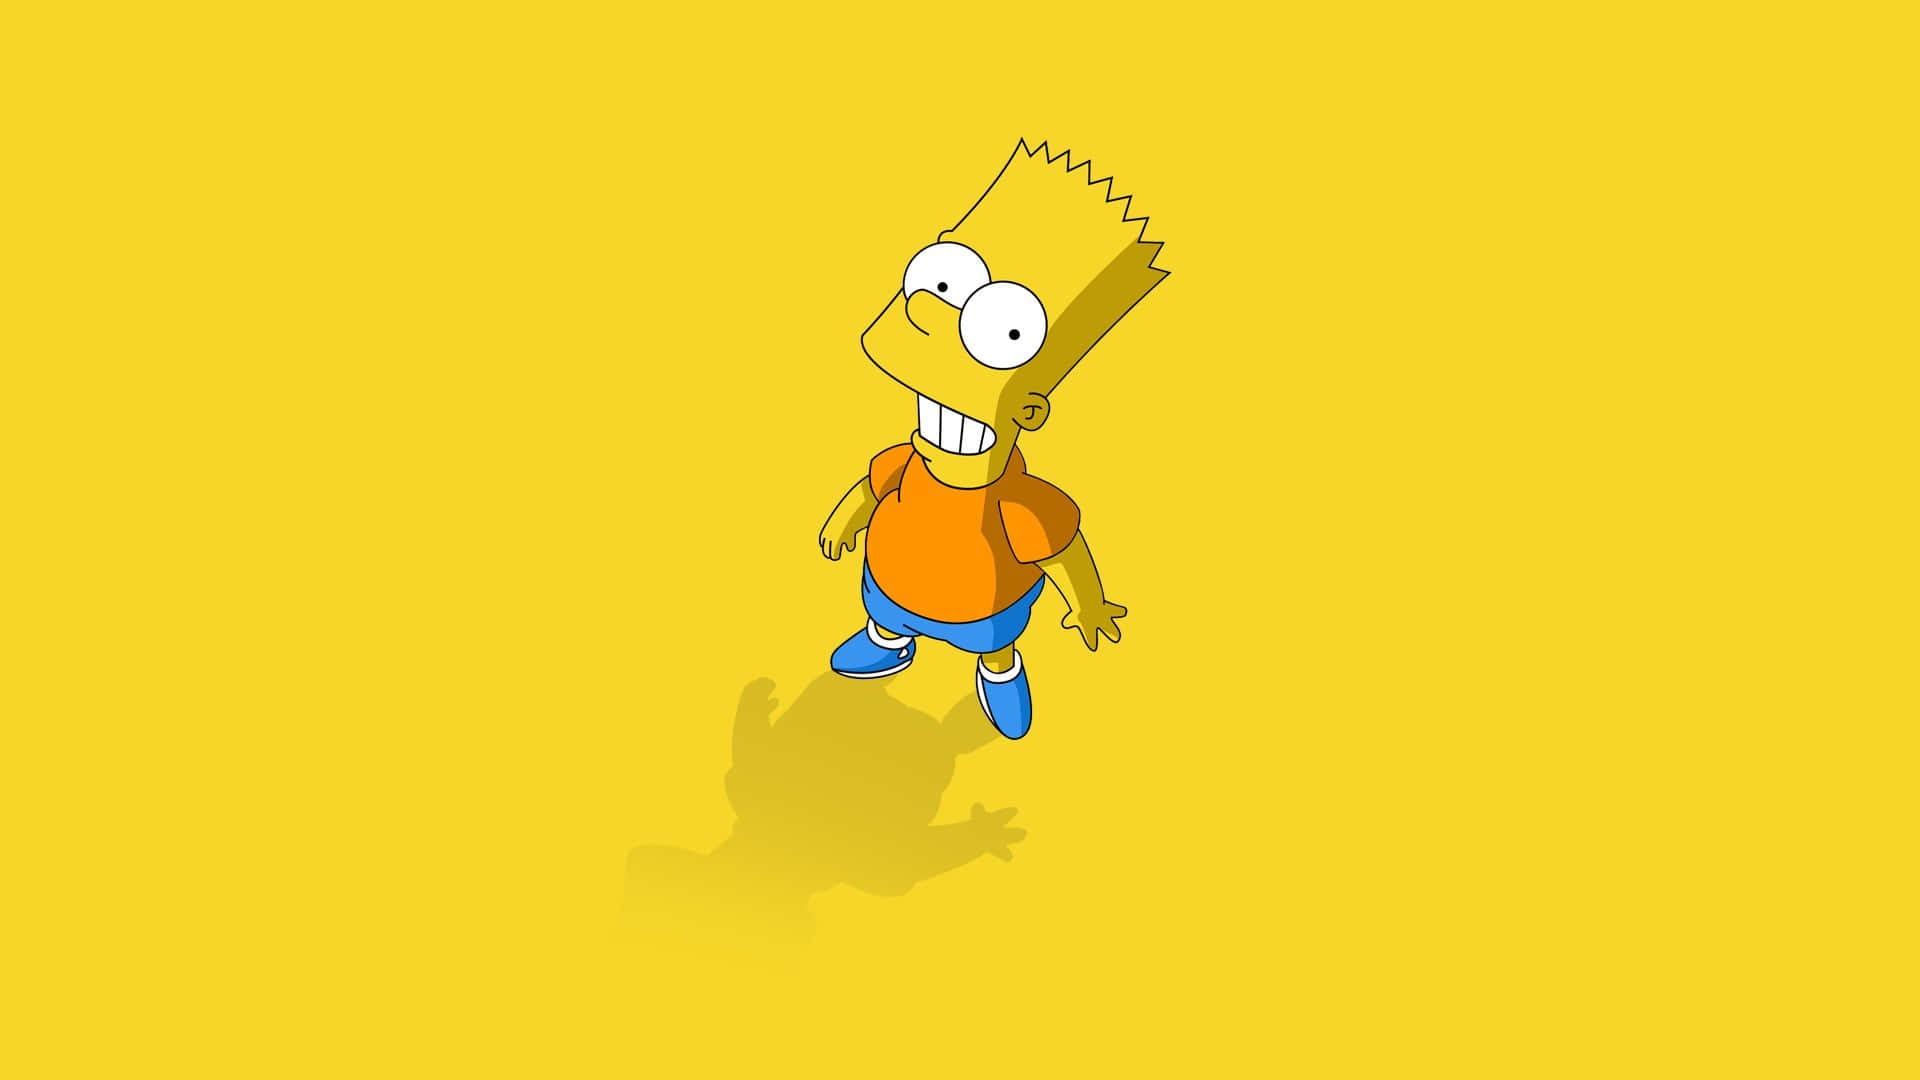 Image  Enjoy a colorfully entertaining journey into the world of The Simpsons with the Simpsons PC Wallpaper